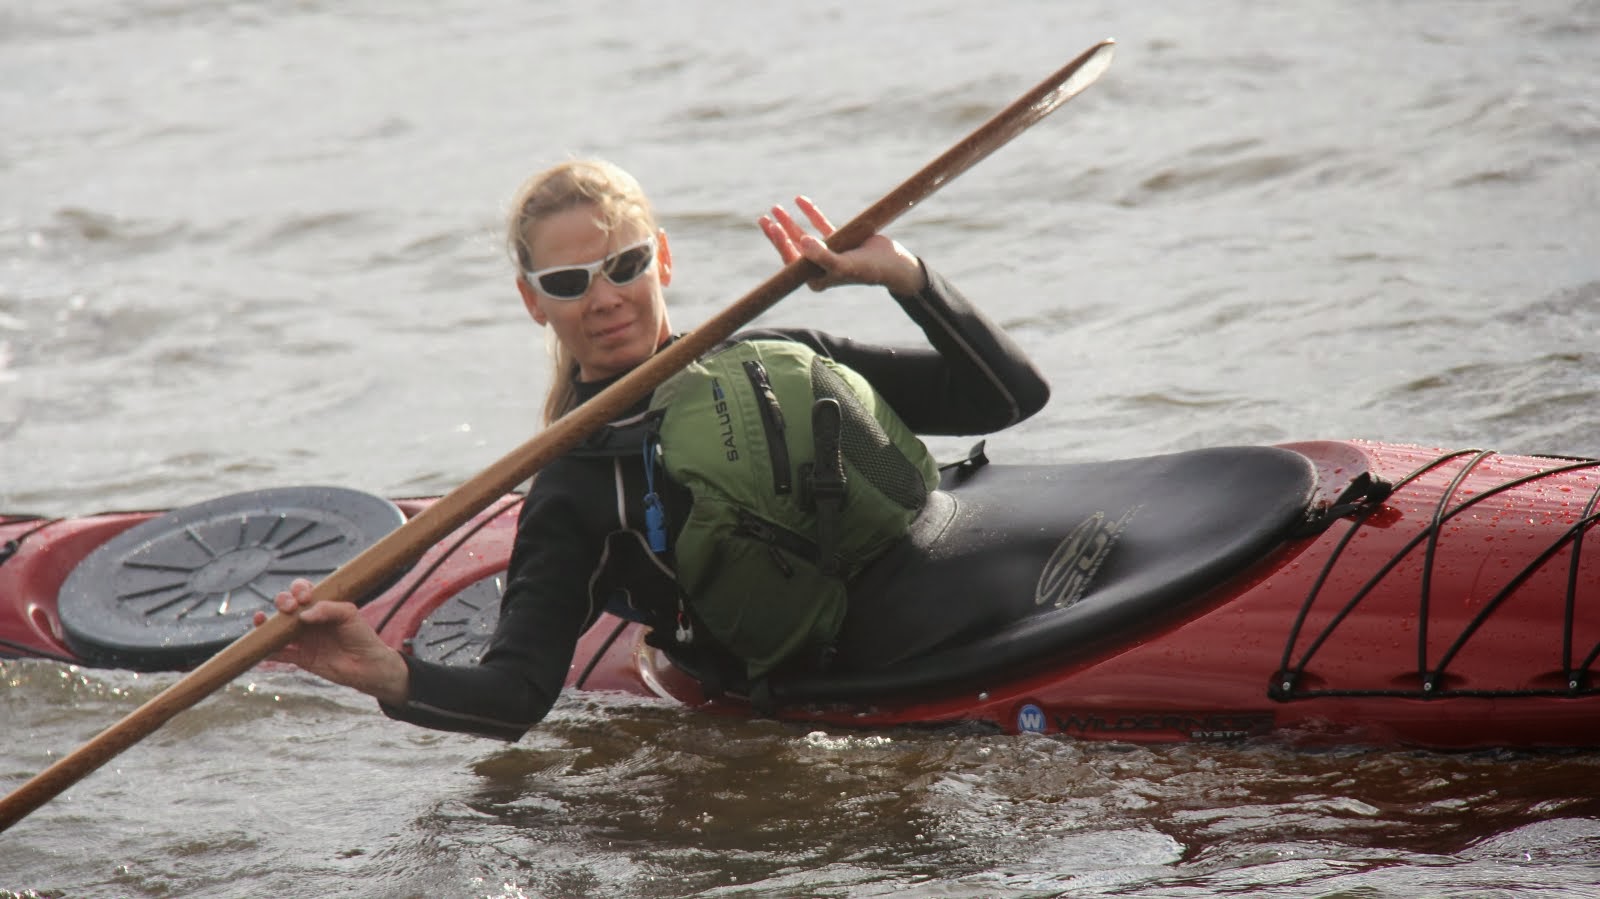 Click the image below to visit the BaffinPaddler outdoor, travel, paddle blog